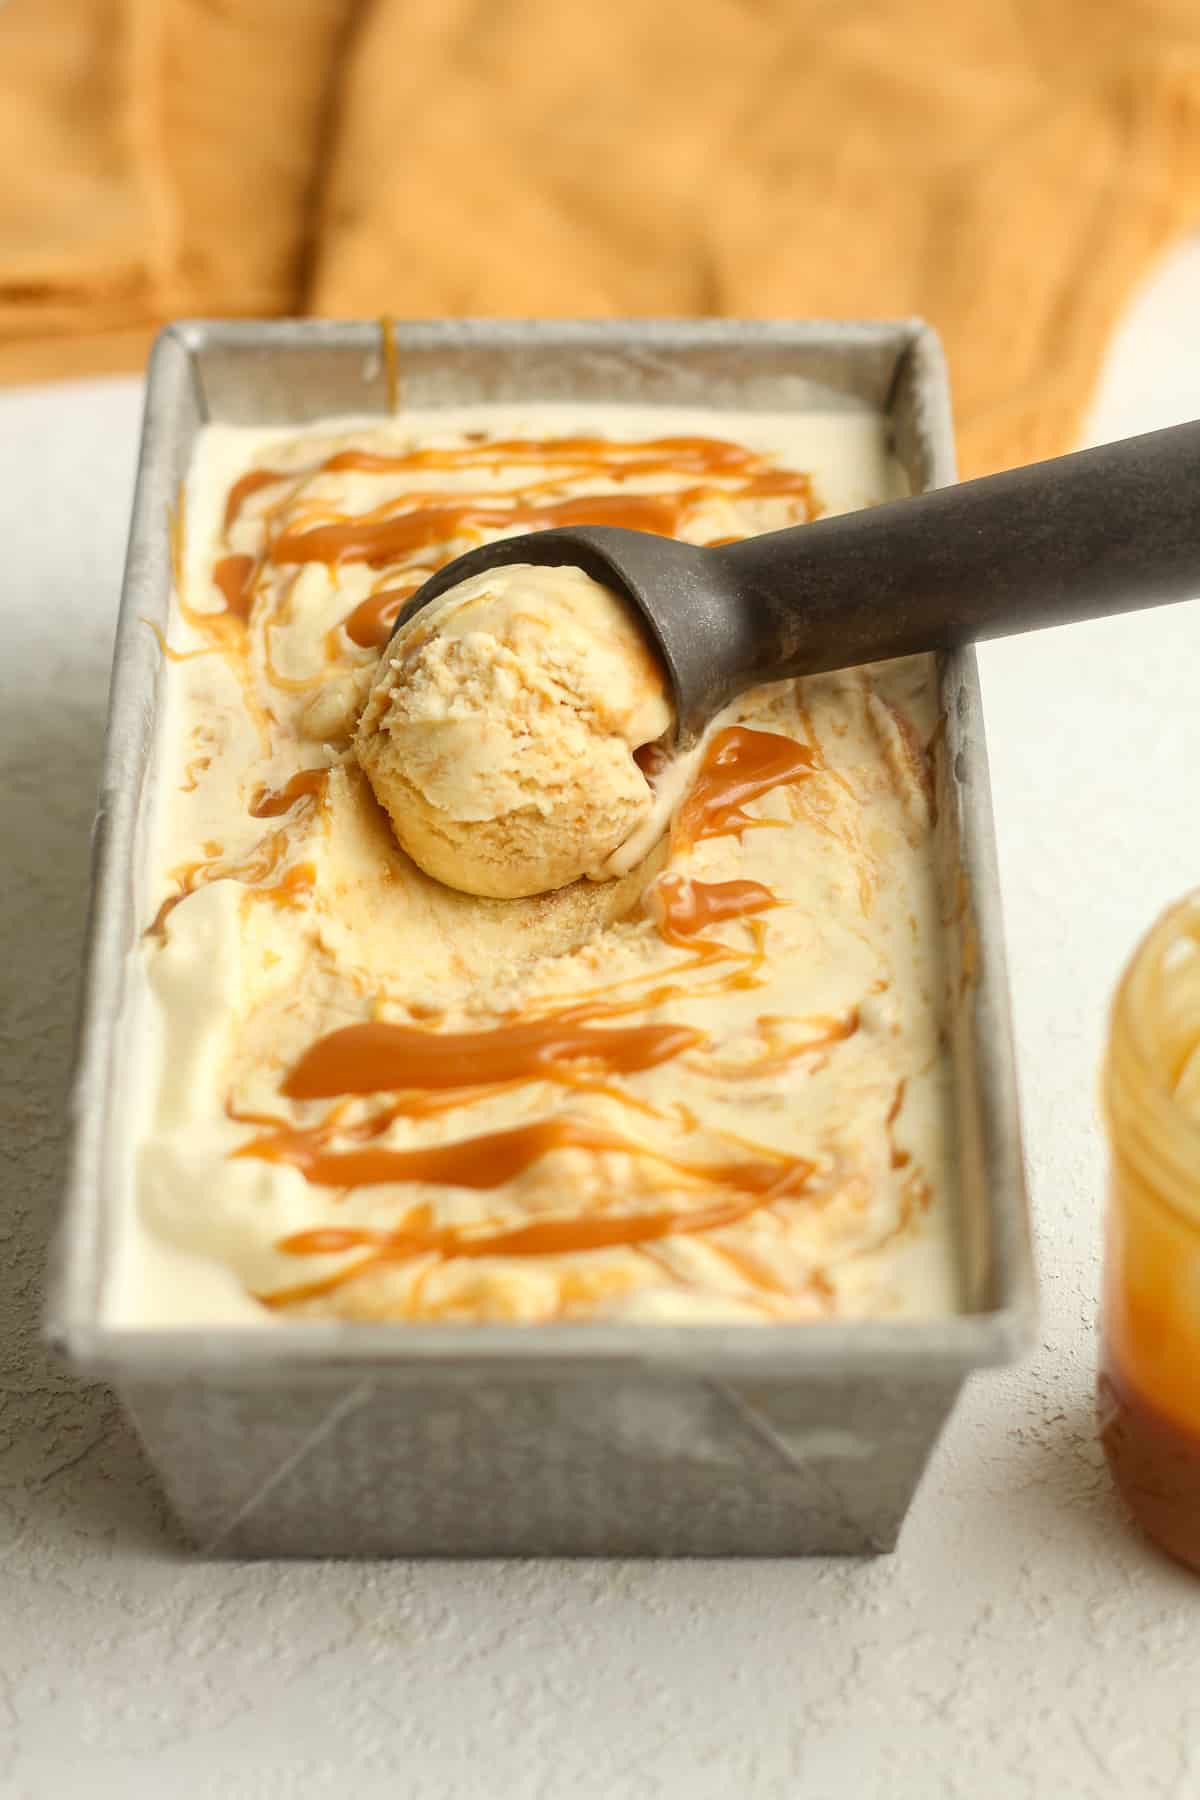 Side view of a pan of caramel swirl ice cream with a scoop inside it.